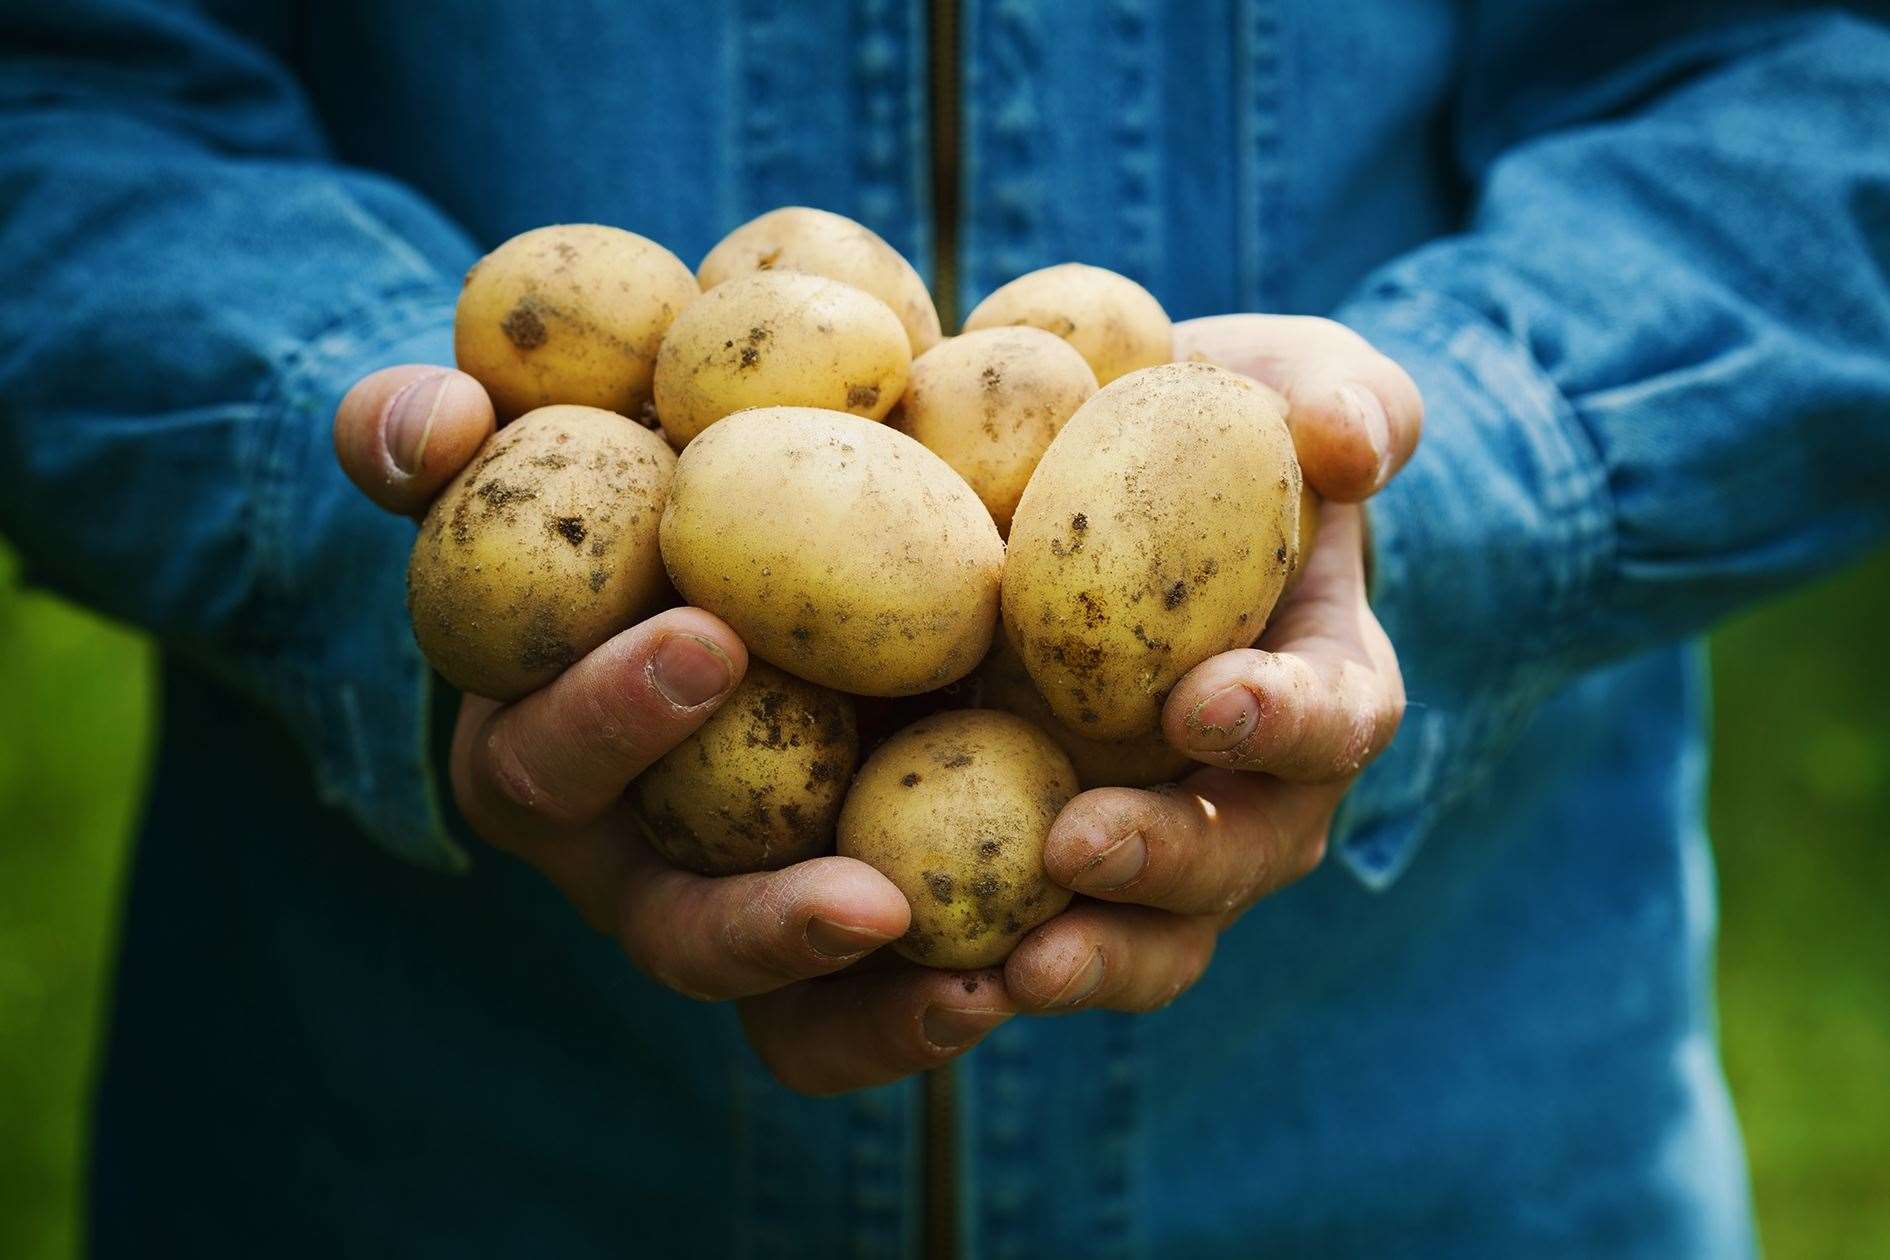 Seed potato exports continue to be hit by Brexit